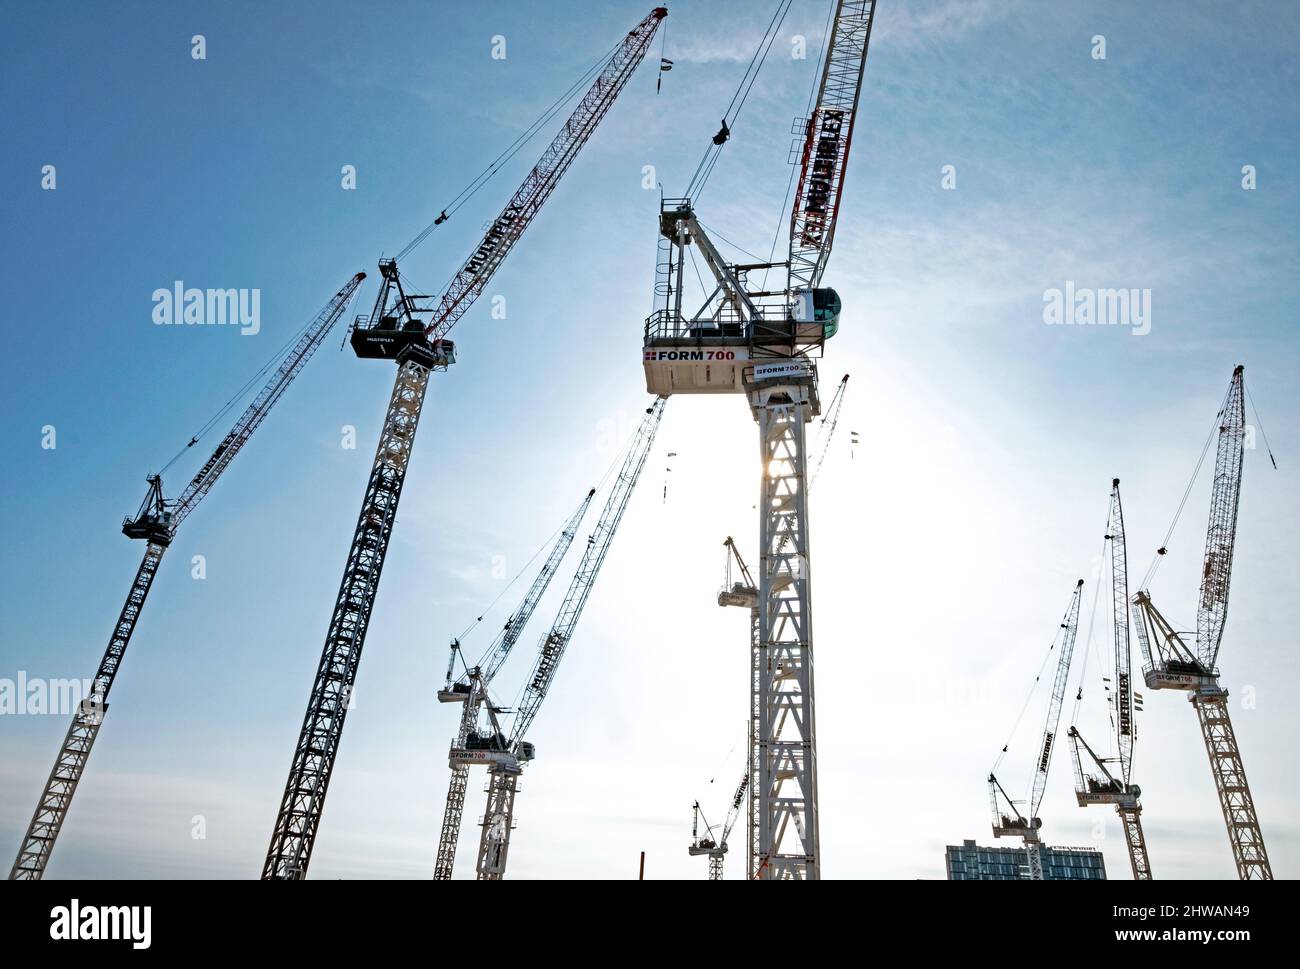 Cranes on the building site of the new Footscray Hospital, Footscray, Melbourne, Victoria, Australia Stock Photo